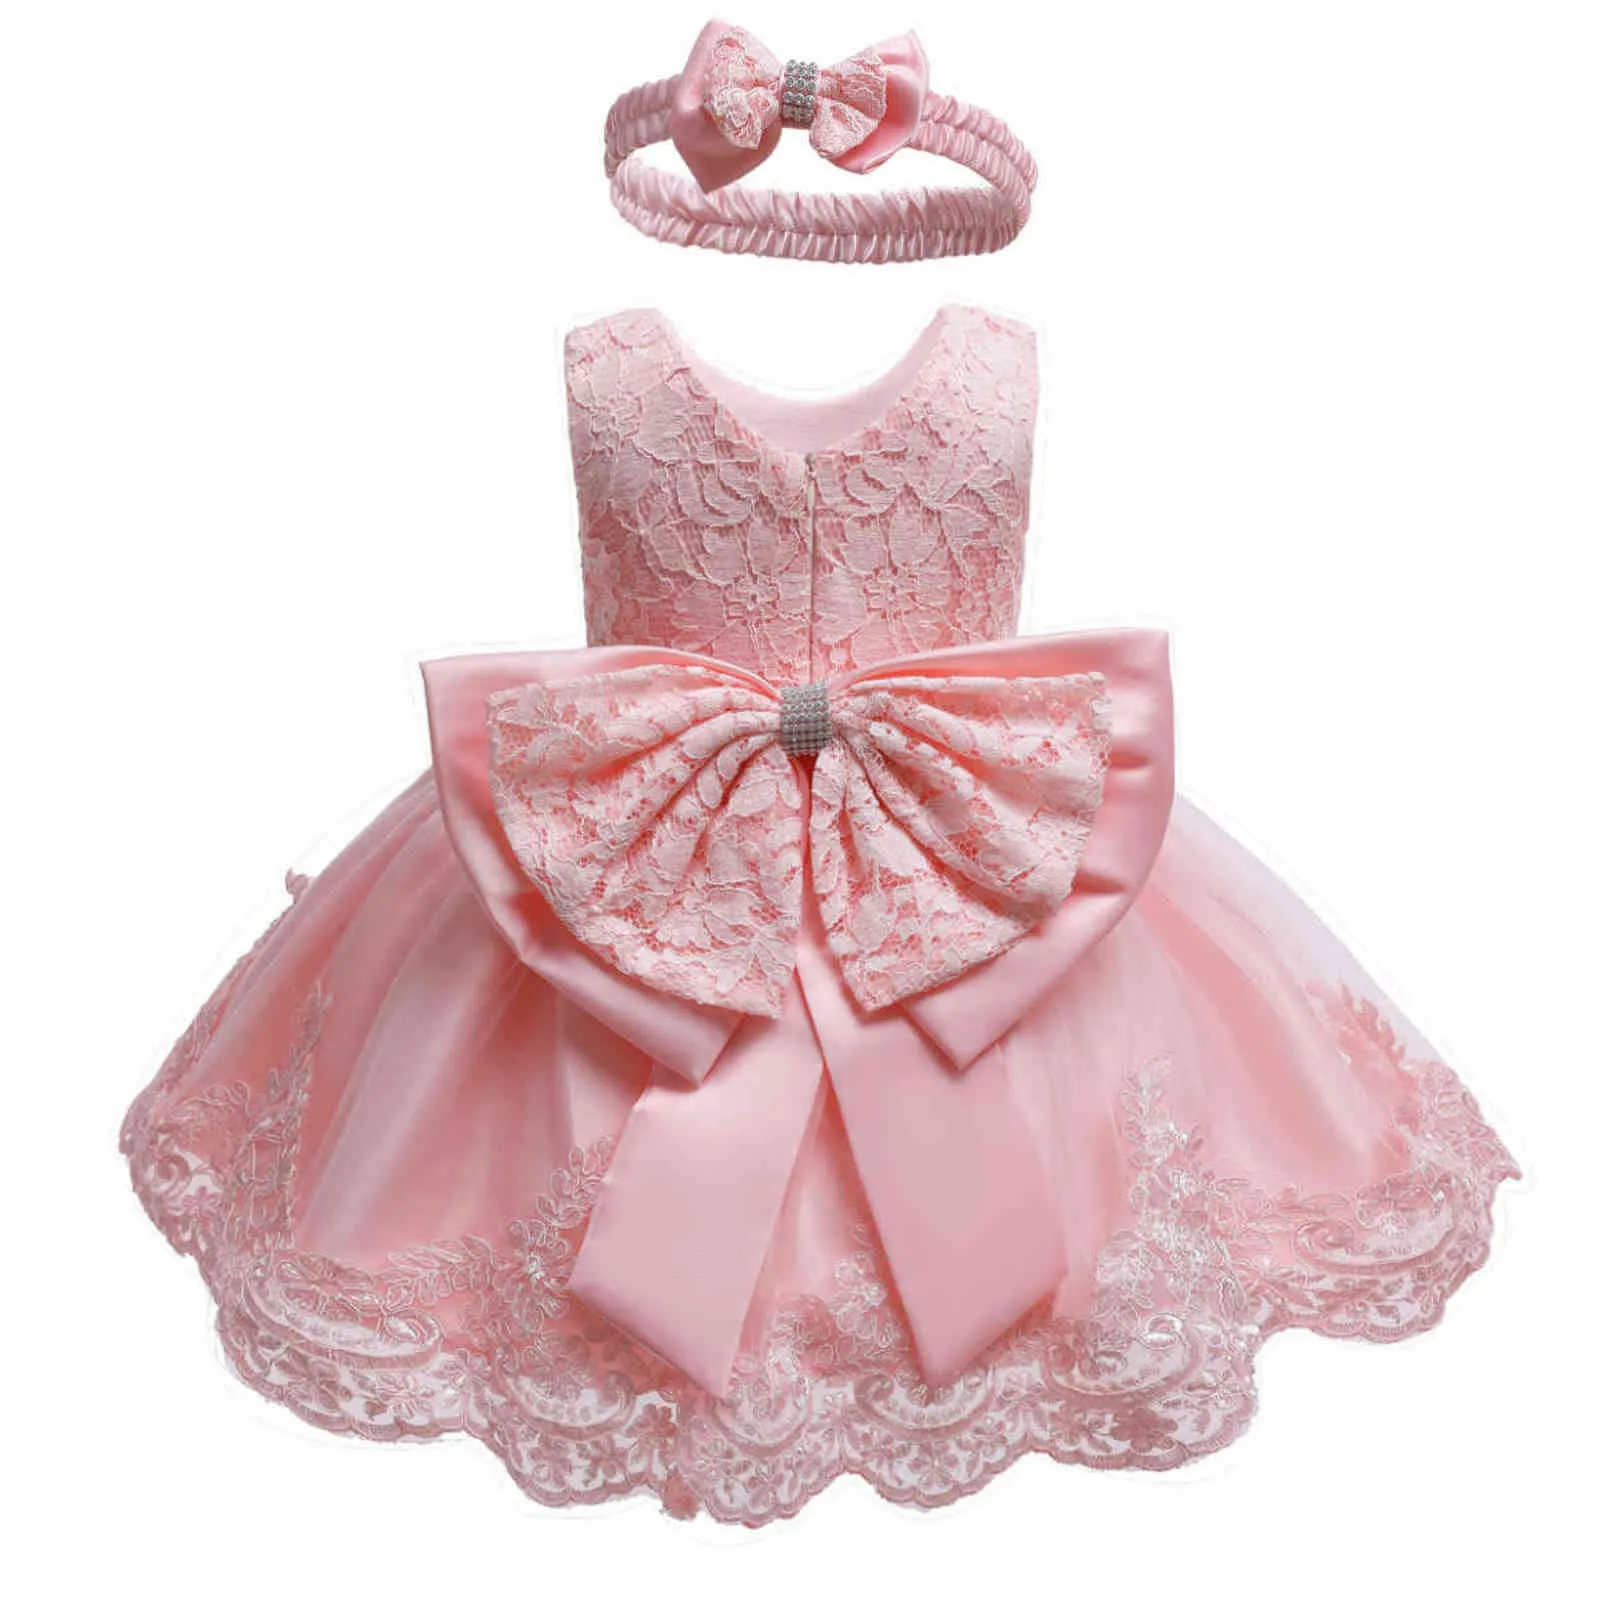 Toddler Bowknot 1 Year Birthday Baby Girls Dress for Newborn Formal Baby Clothes Wedding Party Christening Gown Princess Dresses G1129